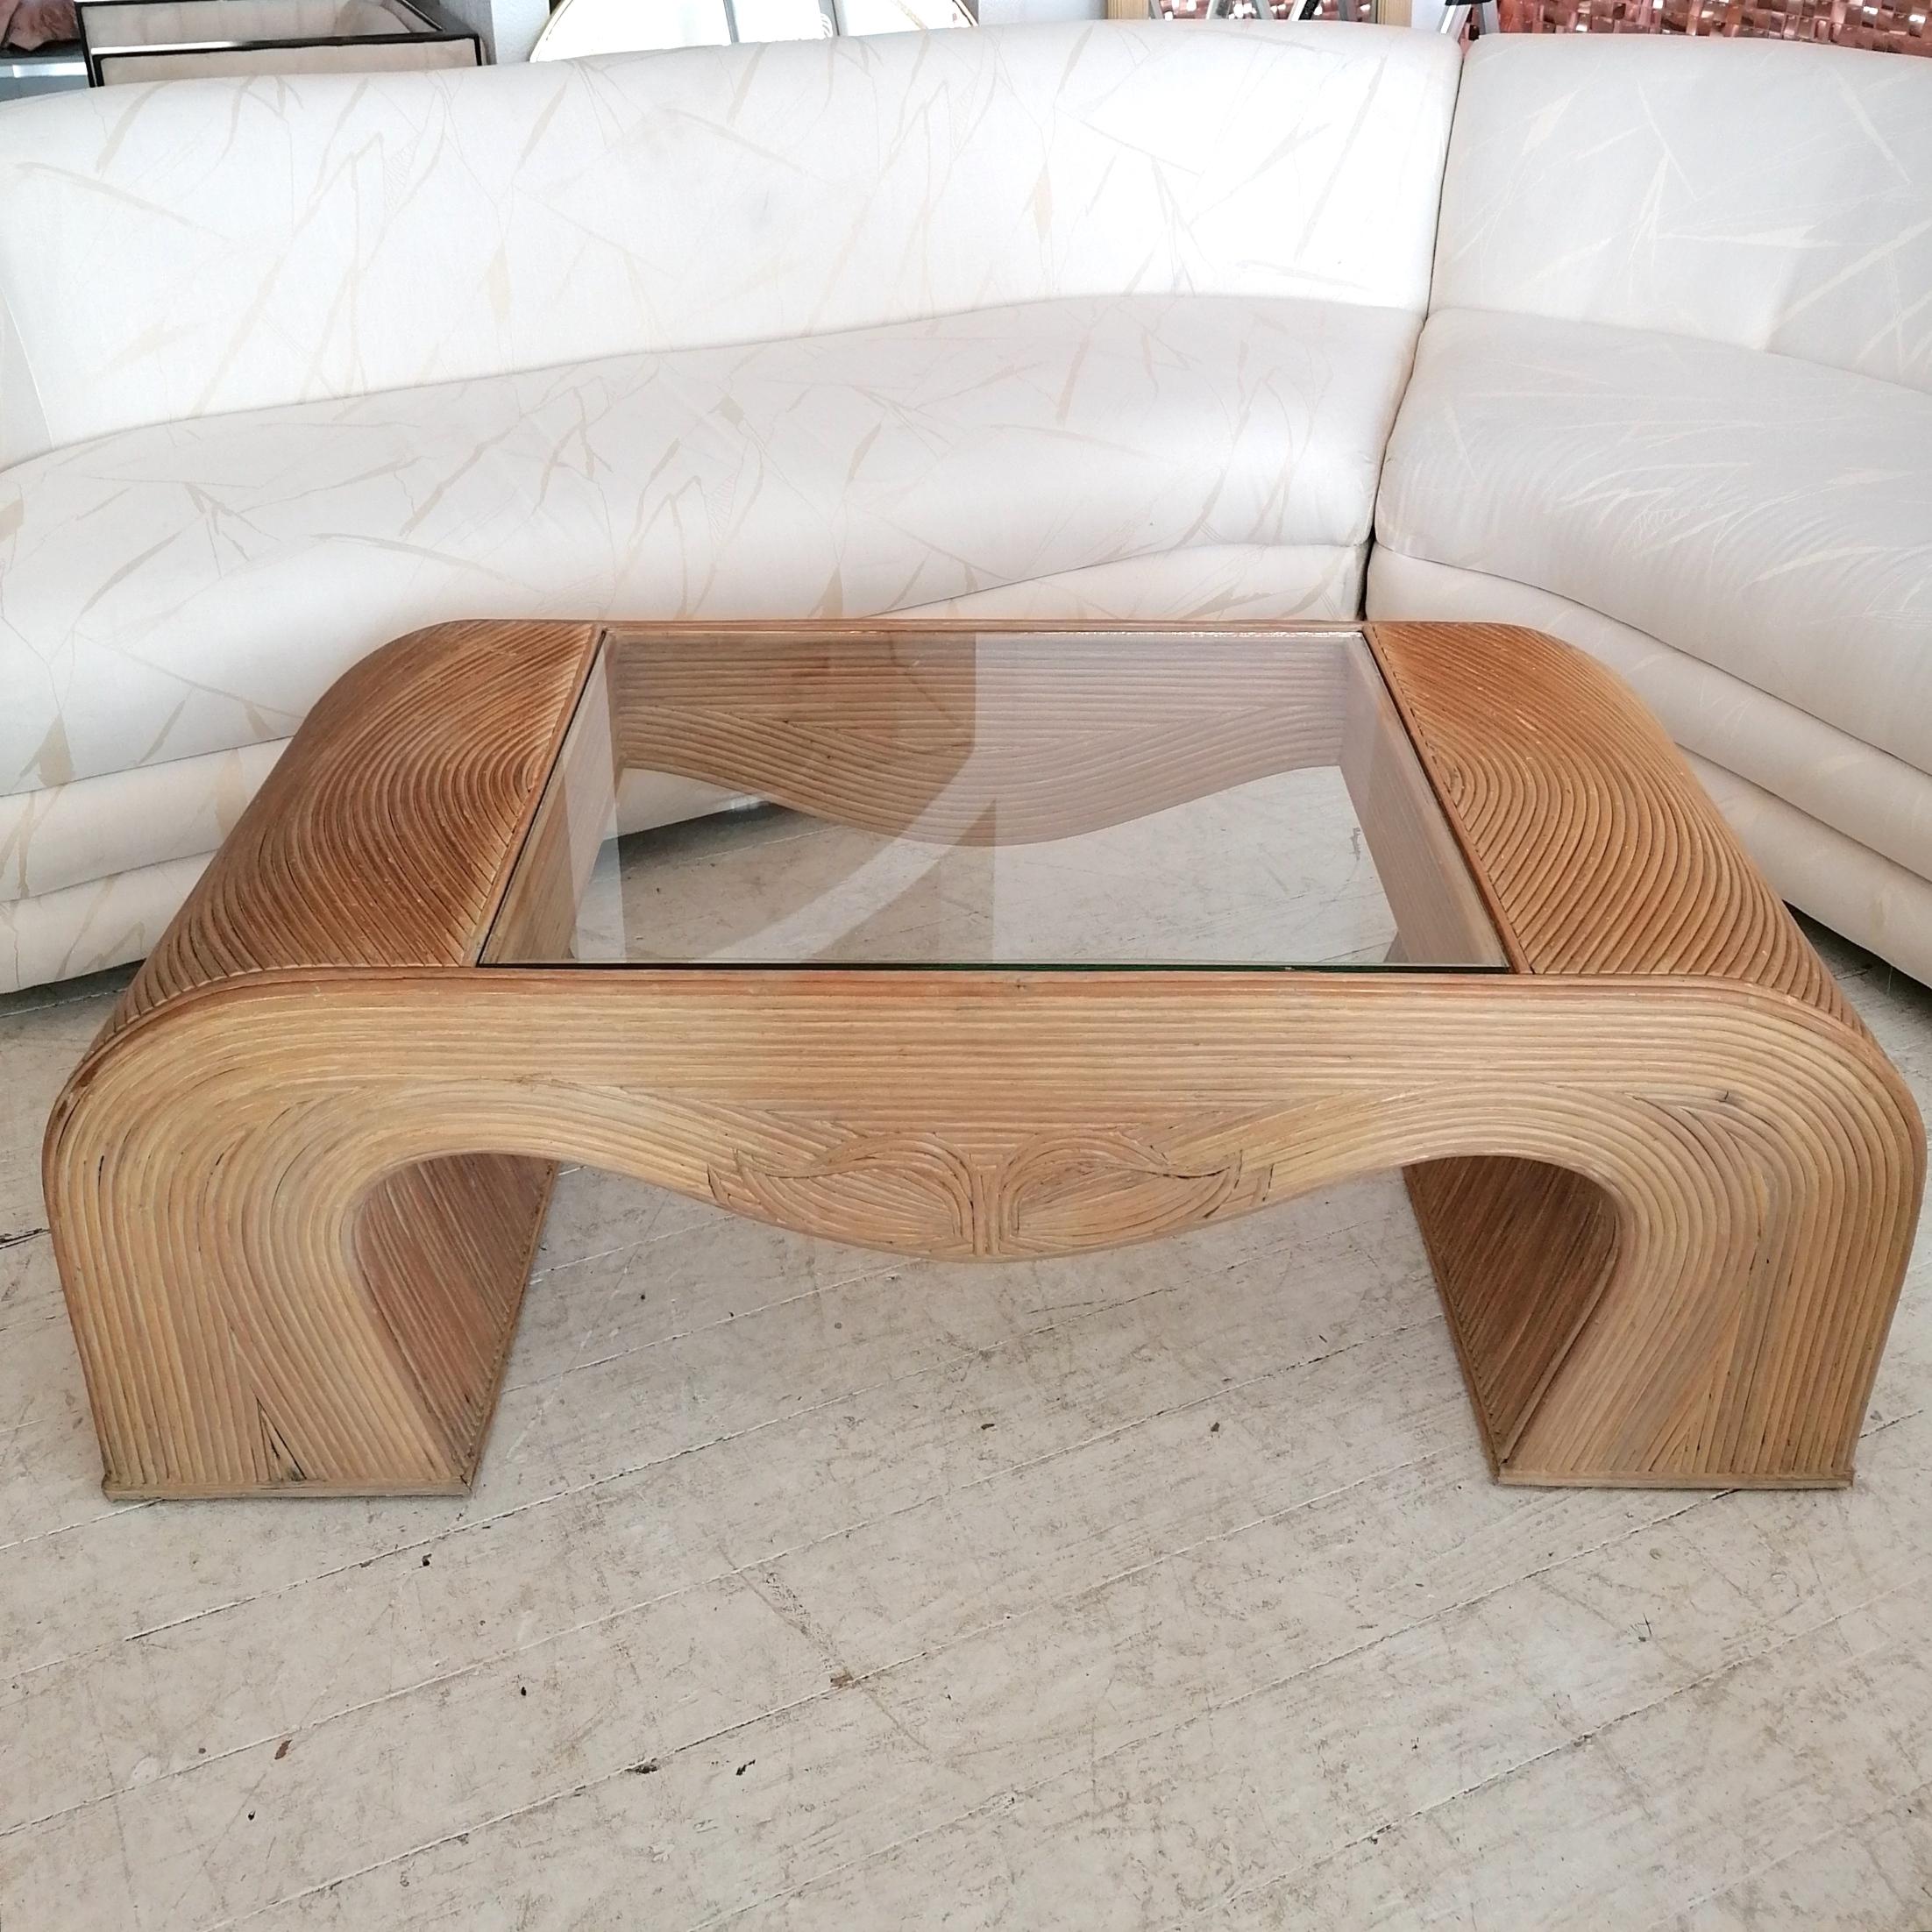 A gorgeous large waterfall pencil reed coffee table with inset glass top. USA, circa 1980s.
In great vintage condition.
Really hard to find this shape.

Dimensions: length 128cm, width 56cm, height 45cm.